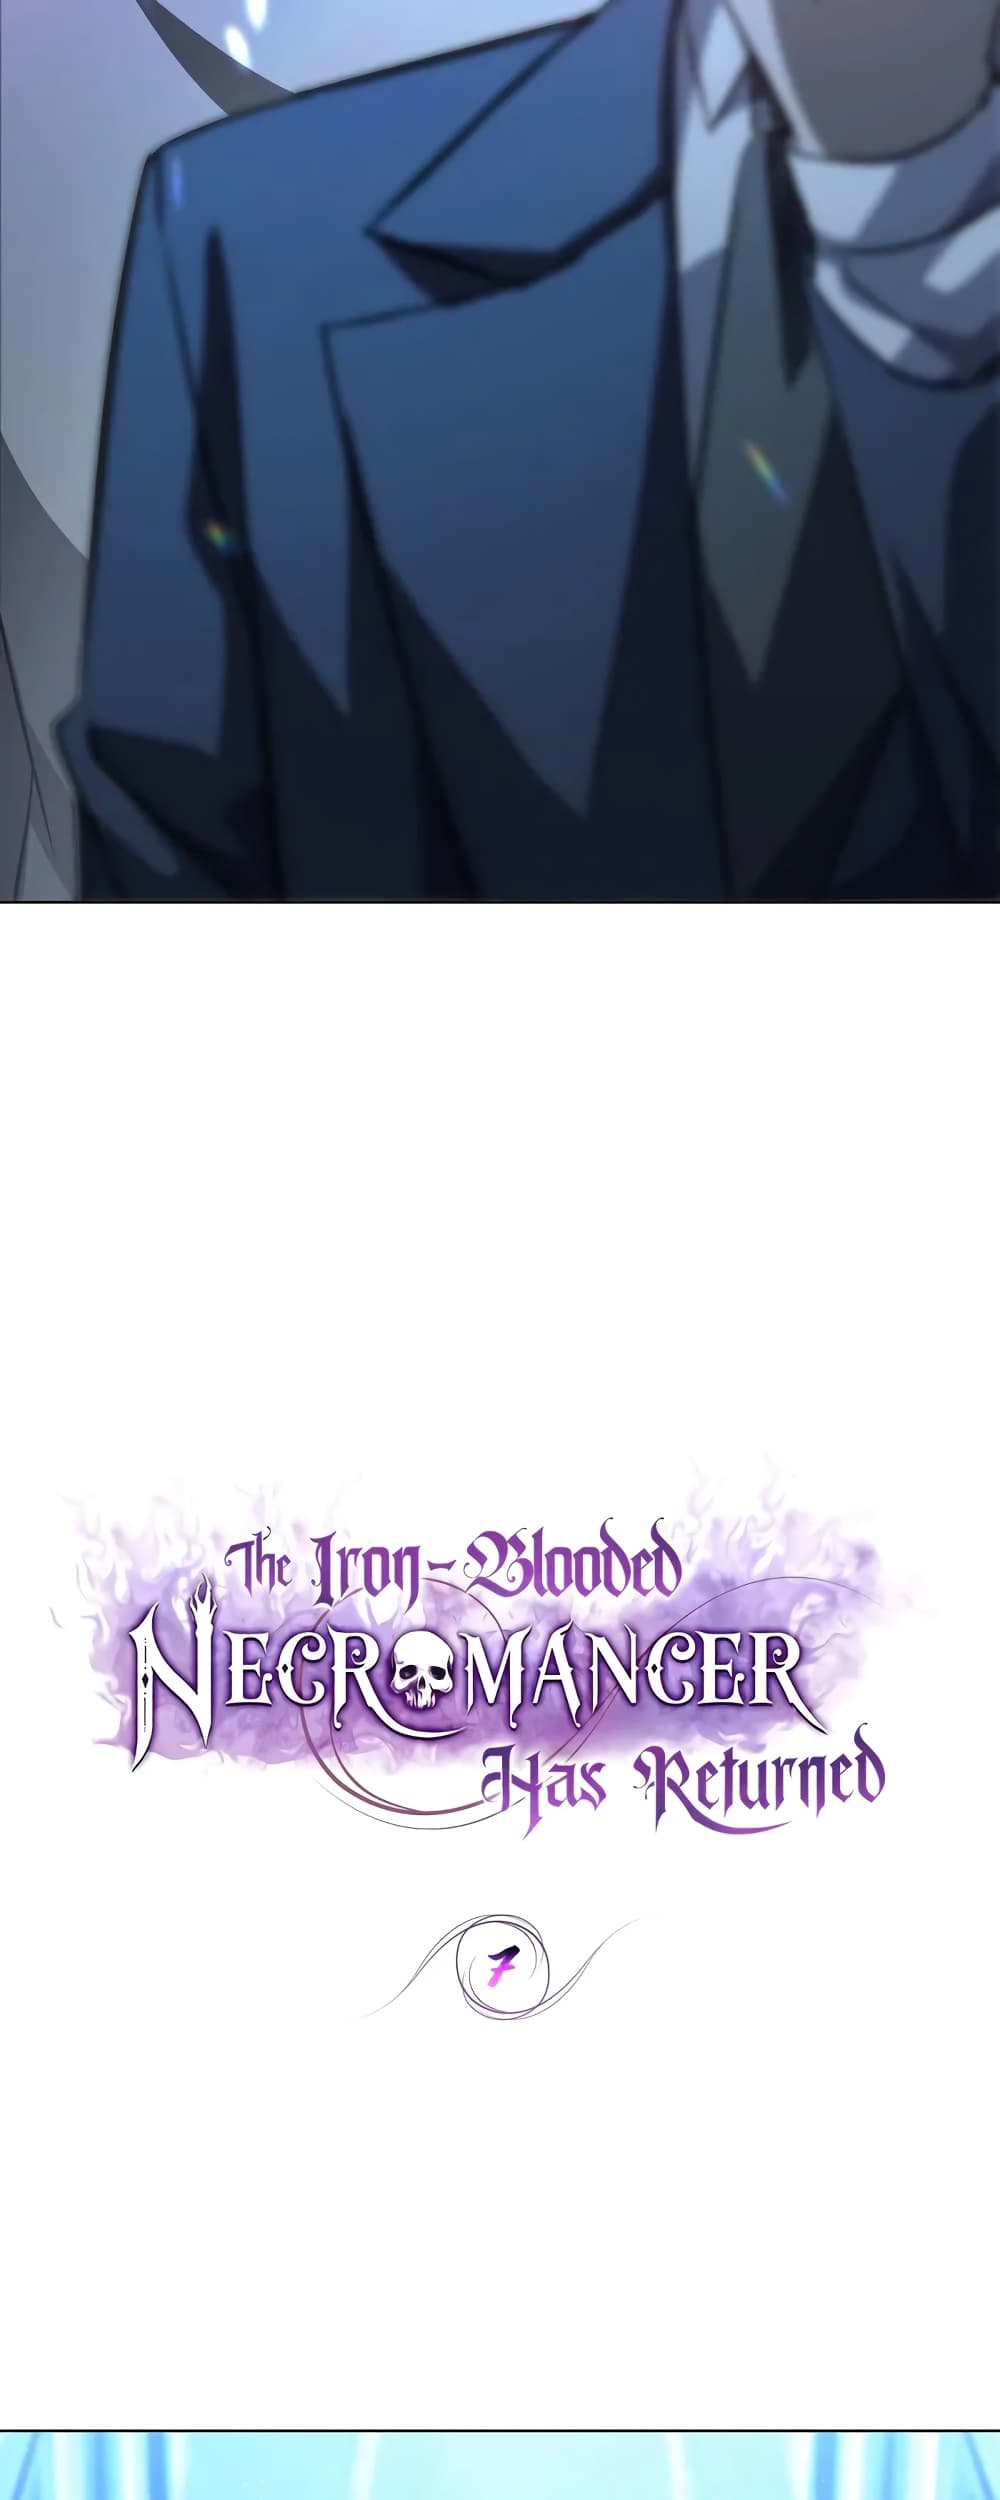 The Iron-Blooded Necromancer Has Returned 7-7